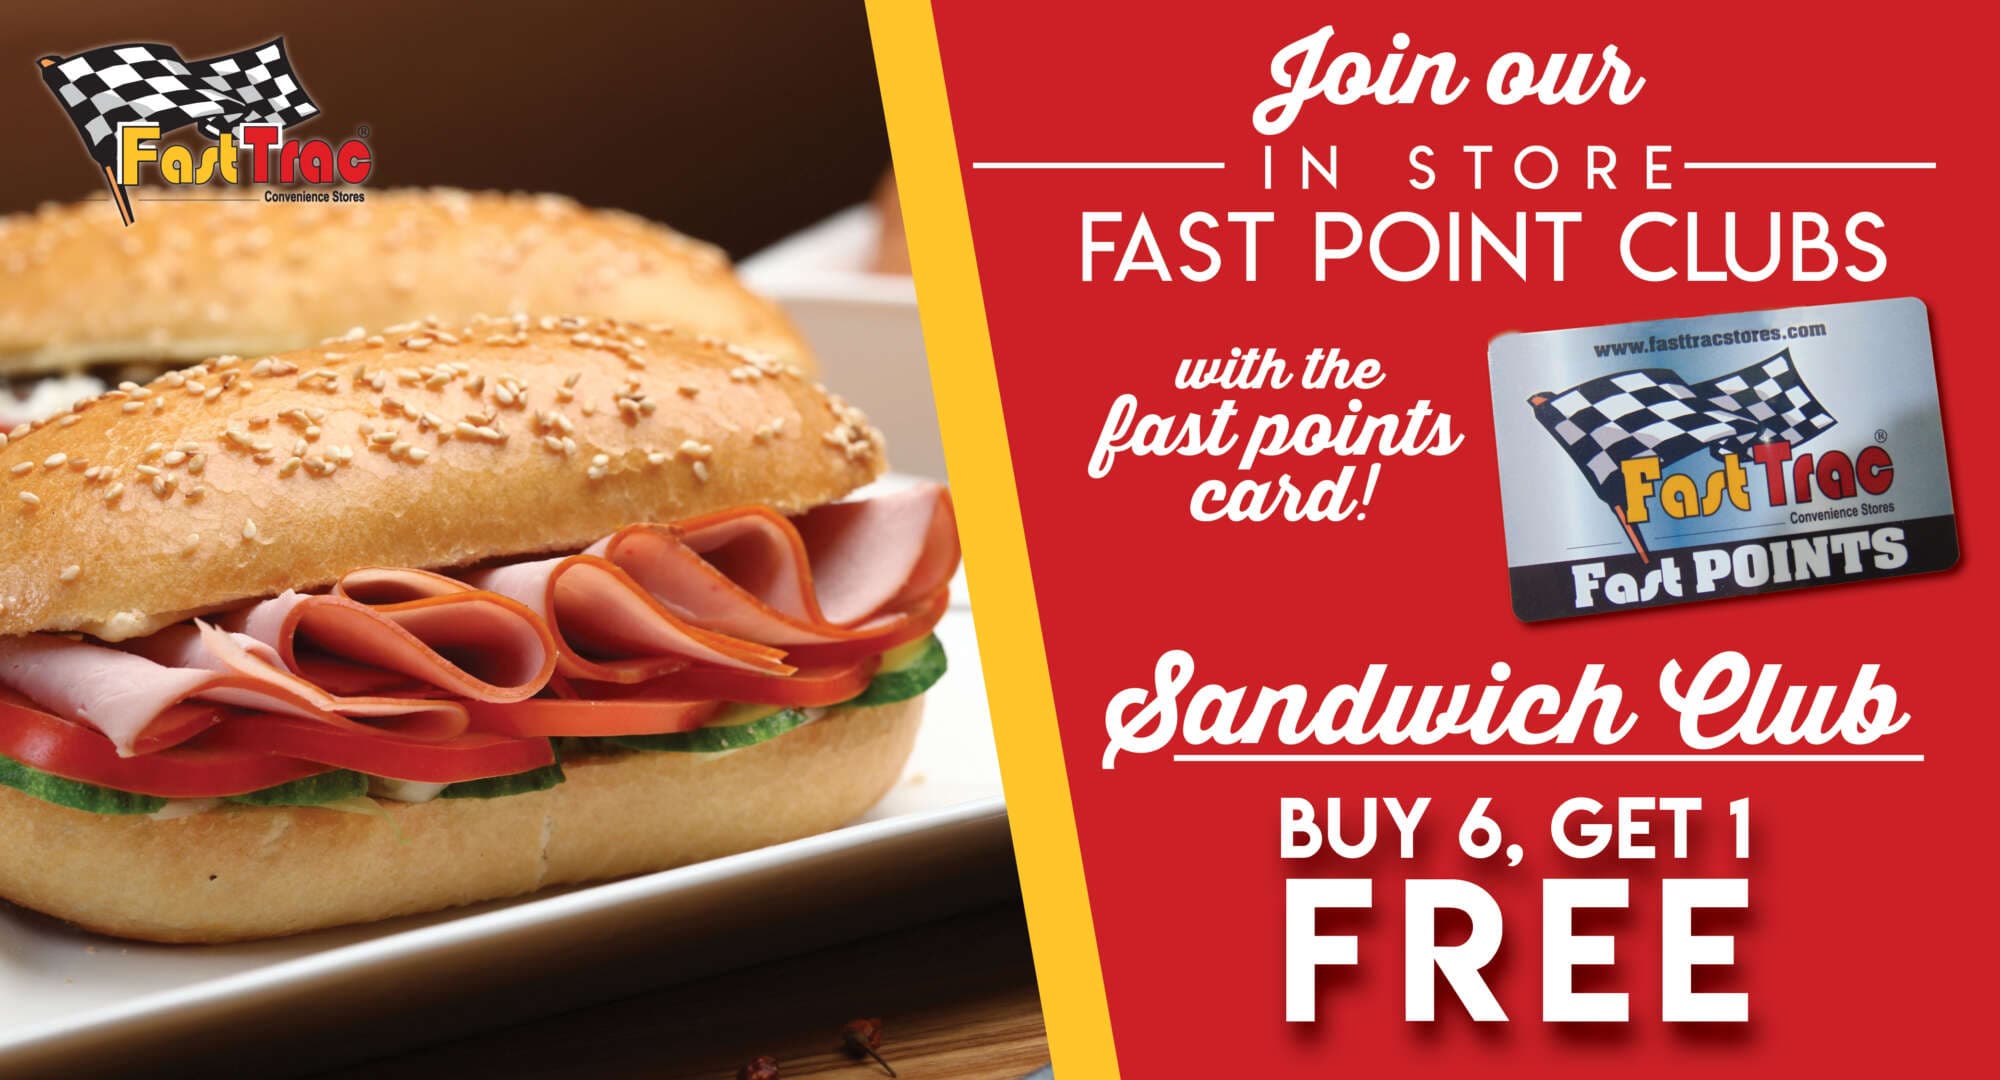 Join our in store Fast Points Clubs with the Fast Points Card! Sandwich Club: Buy 6, Get 1 FREE!